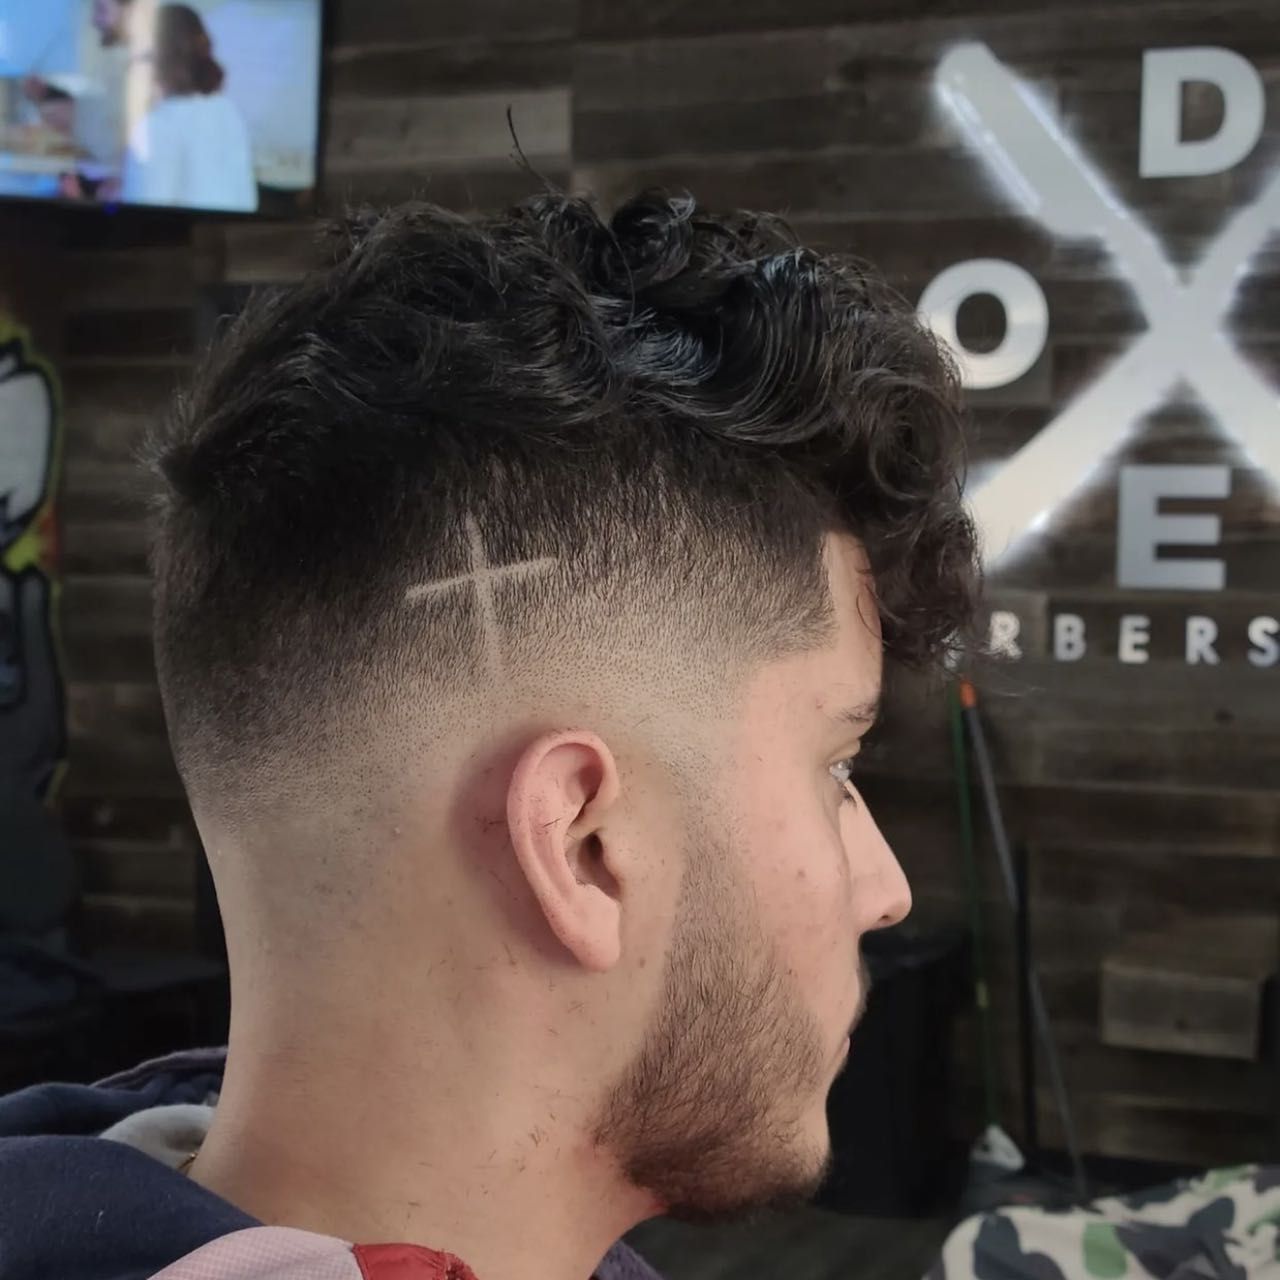 DOPE Barbershop – Be Dope. Act Dope. Stay Dope.